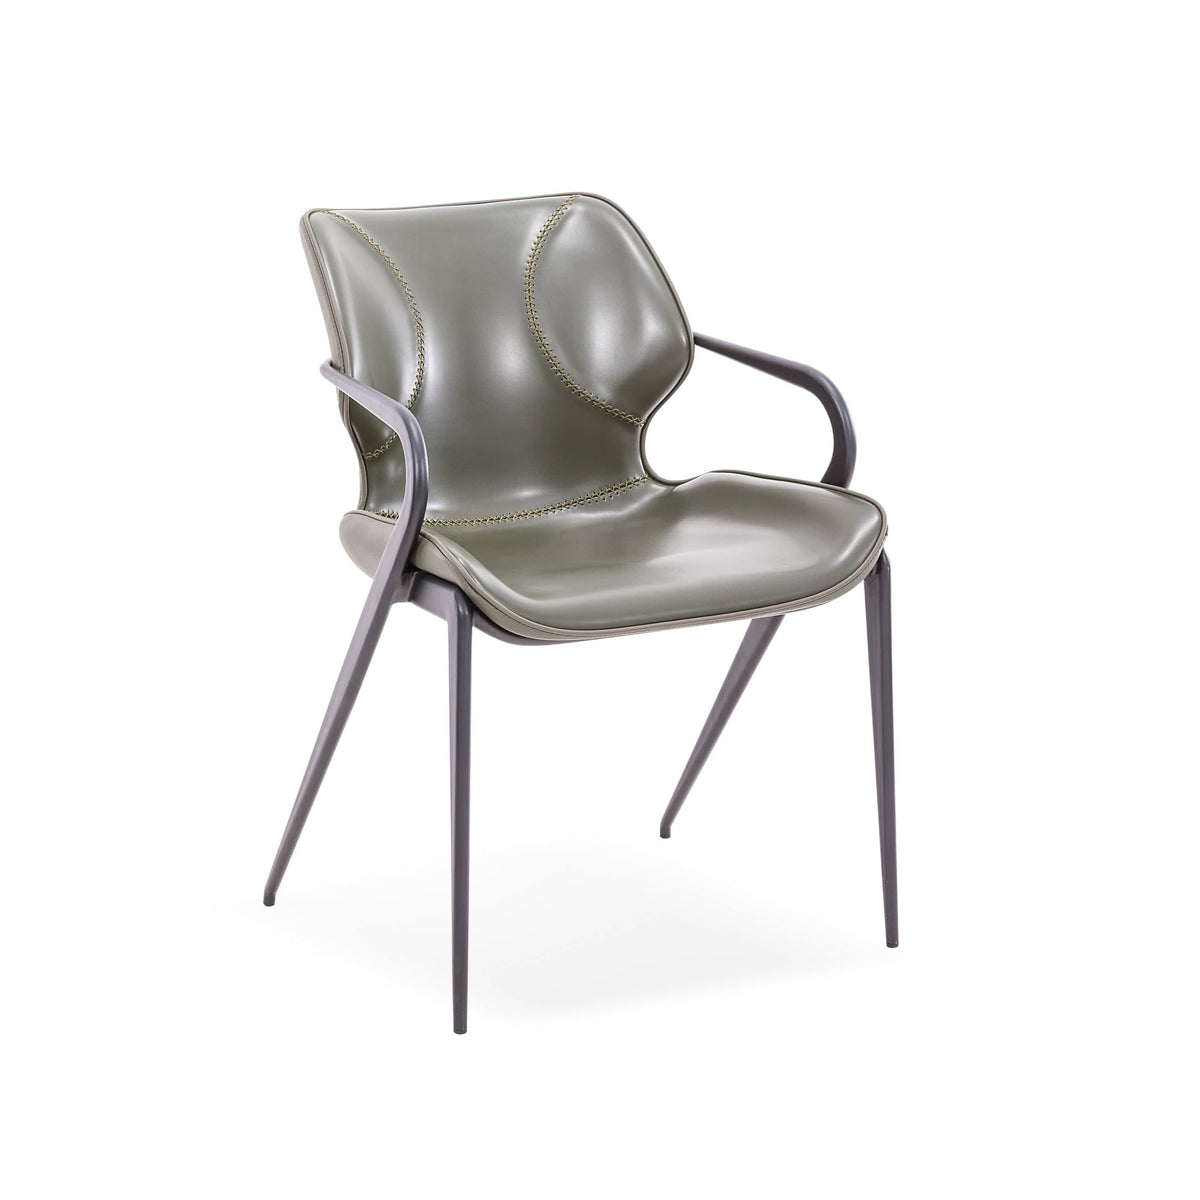 Sheard Dining Chair Casa Concetto Singapore